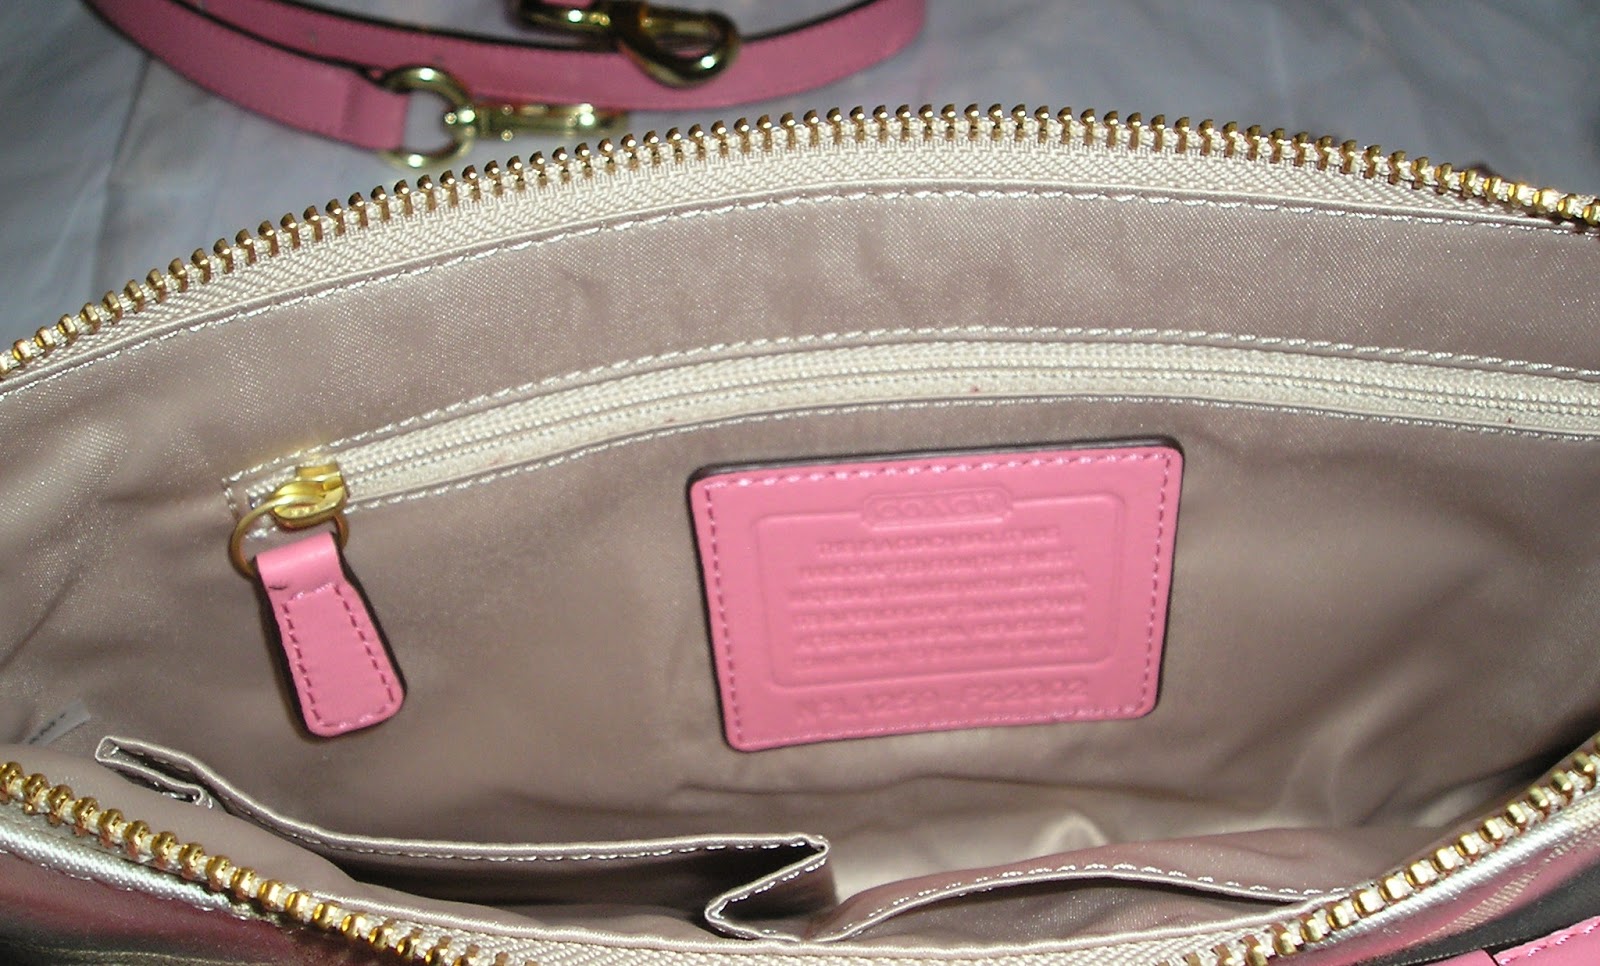 Glamorous Addiction: My New Coach Bag & Charm From The Outlet